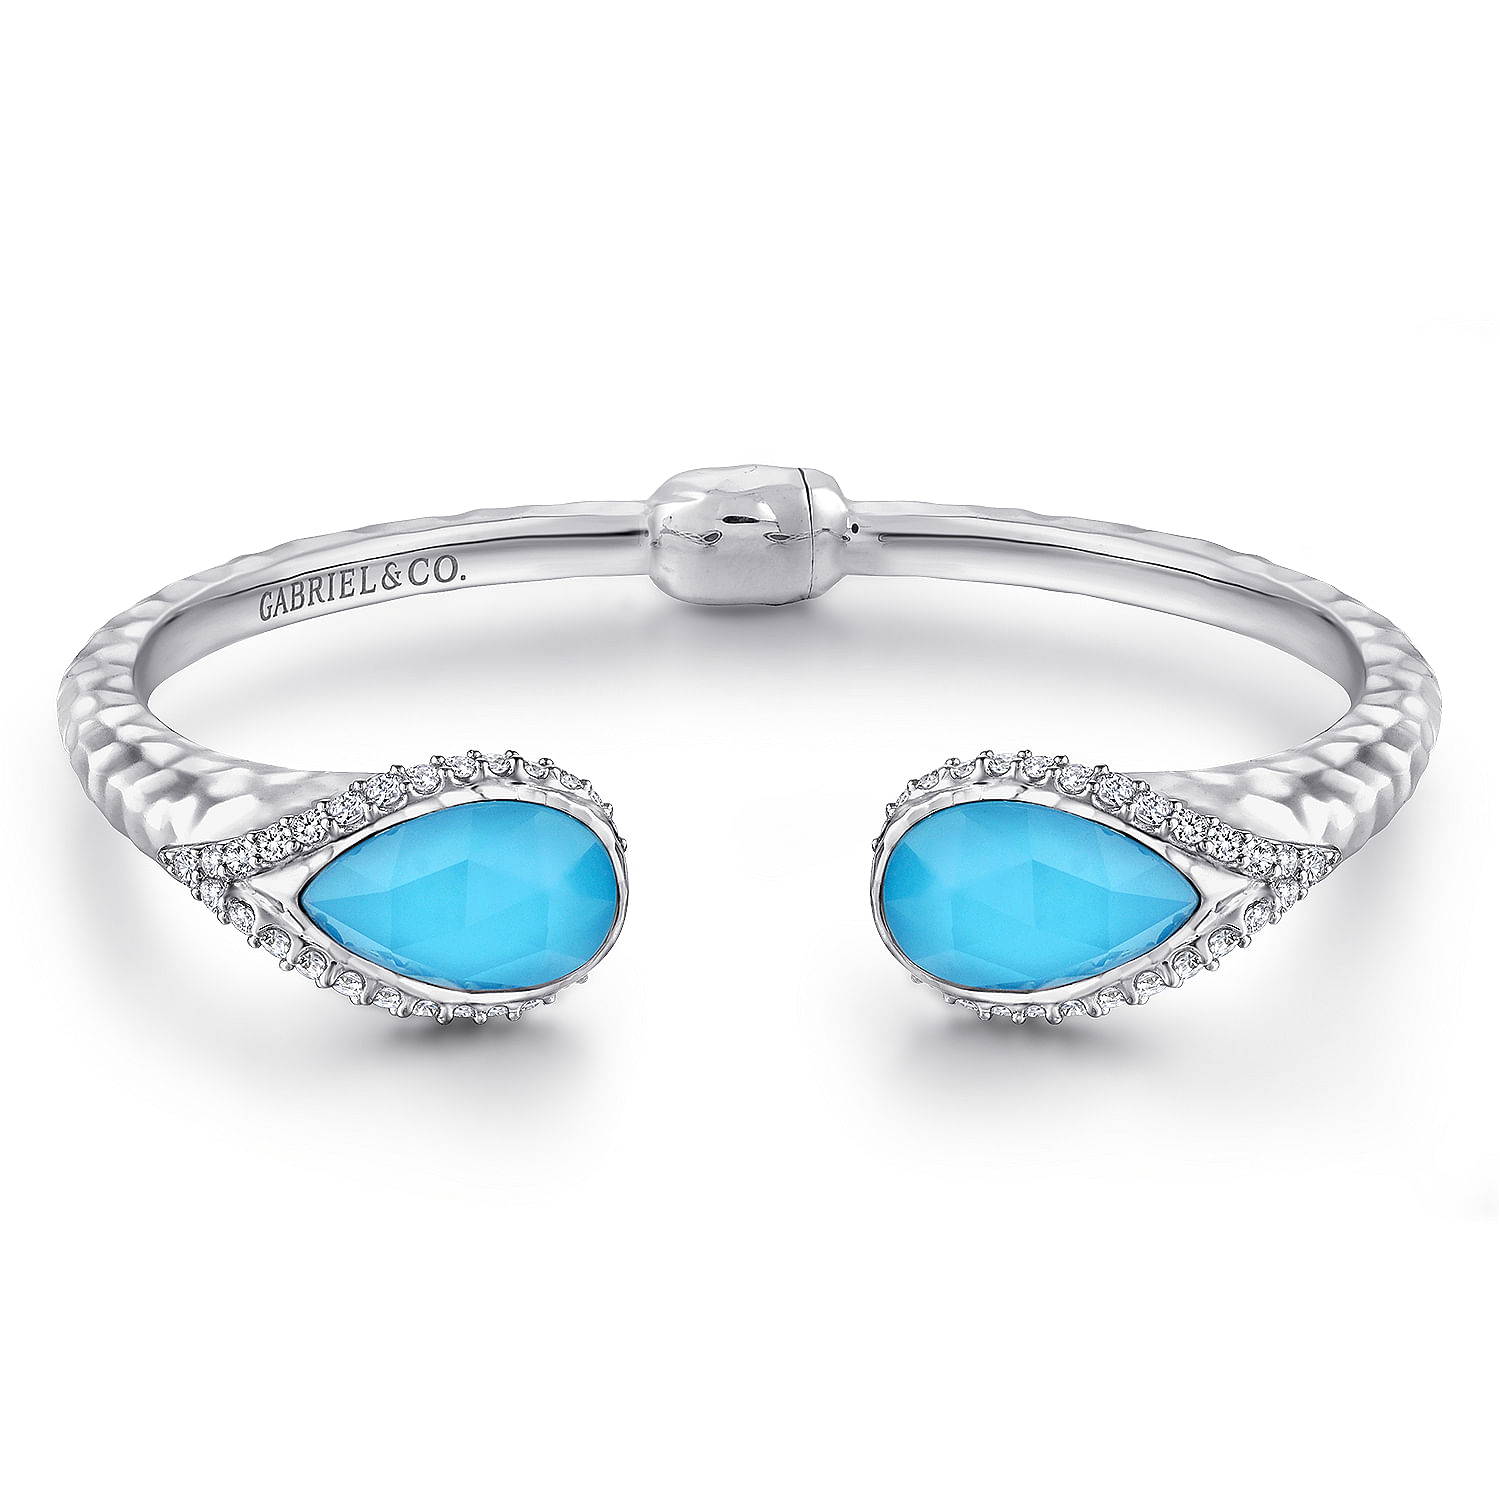 925 Sterling Silver Teardrop Rock Crystal/Turquoise and White Sapphire Split Bangle